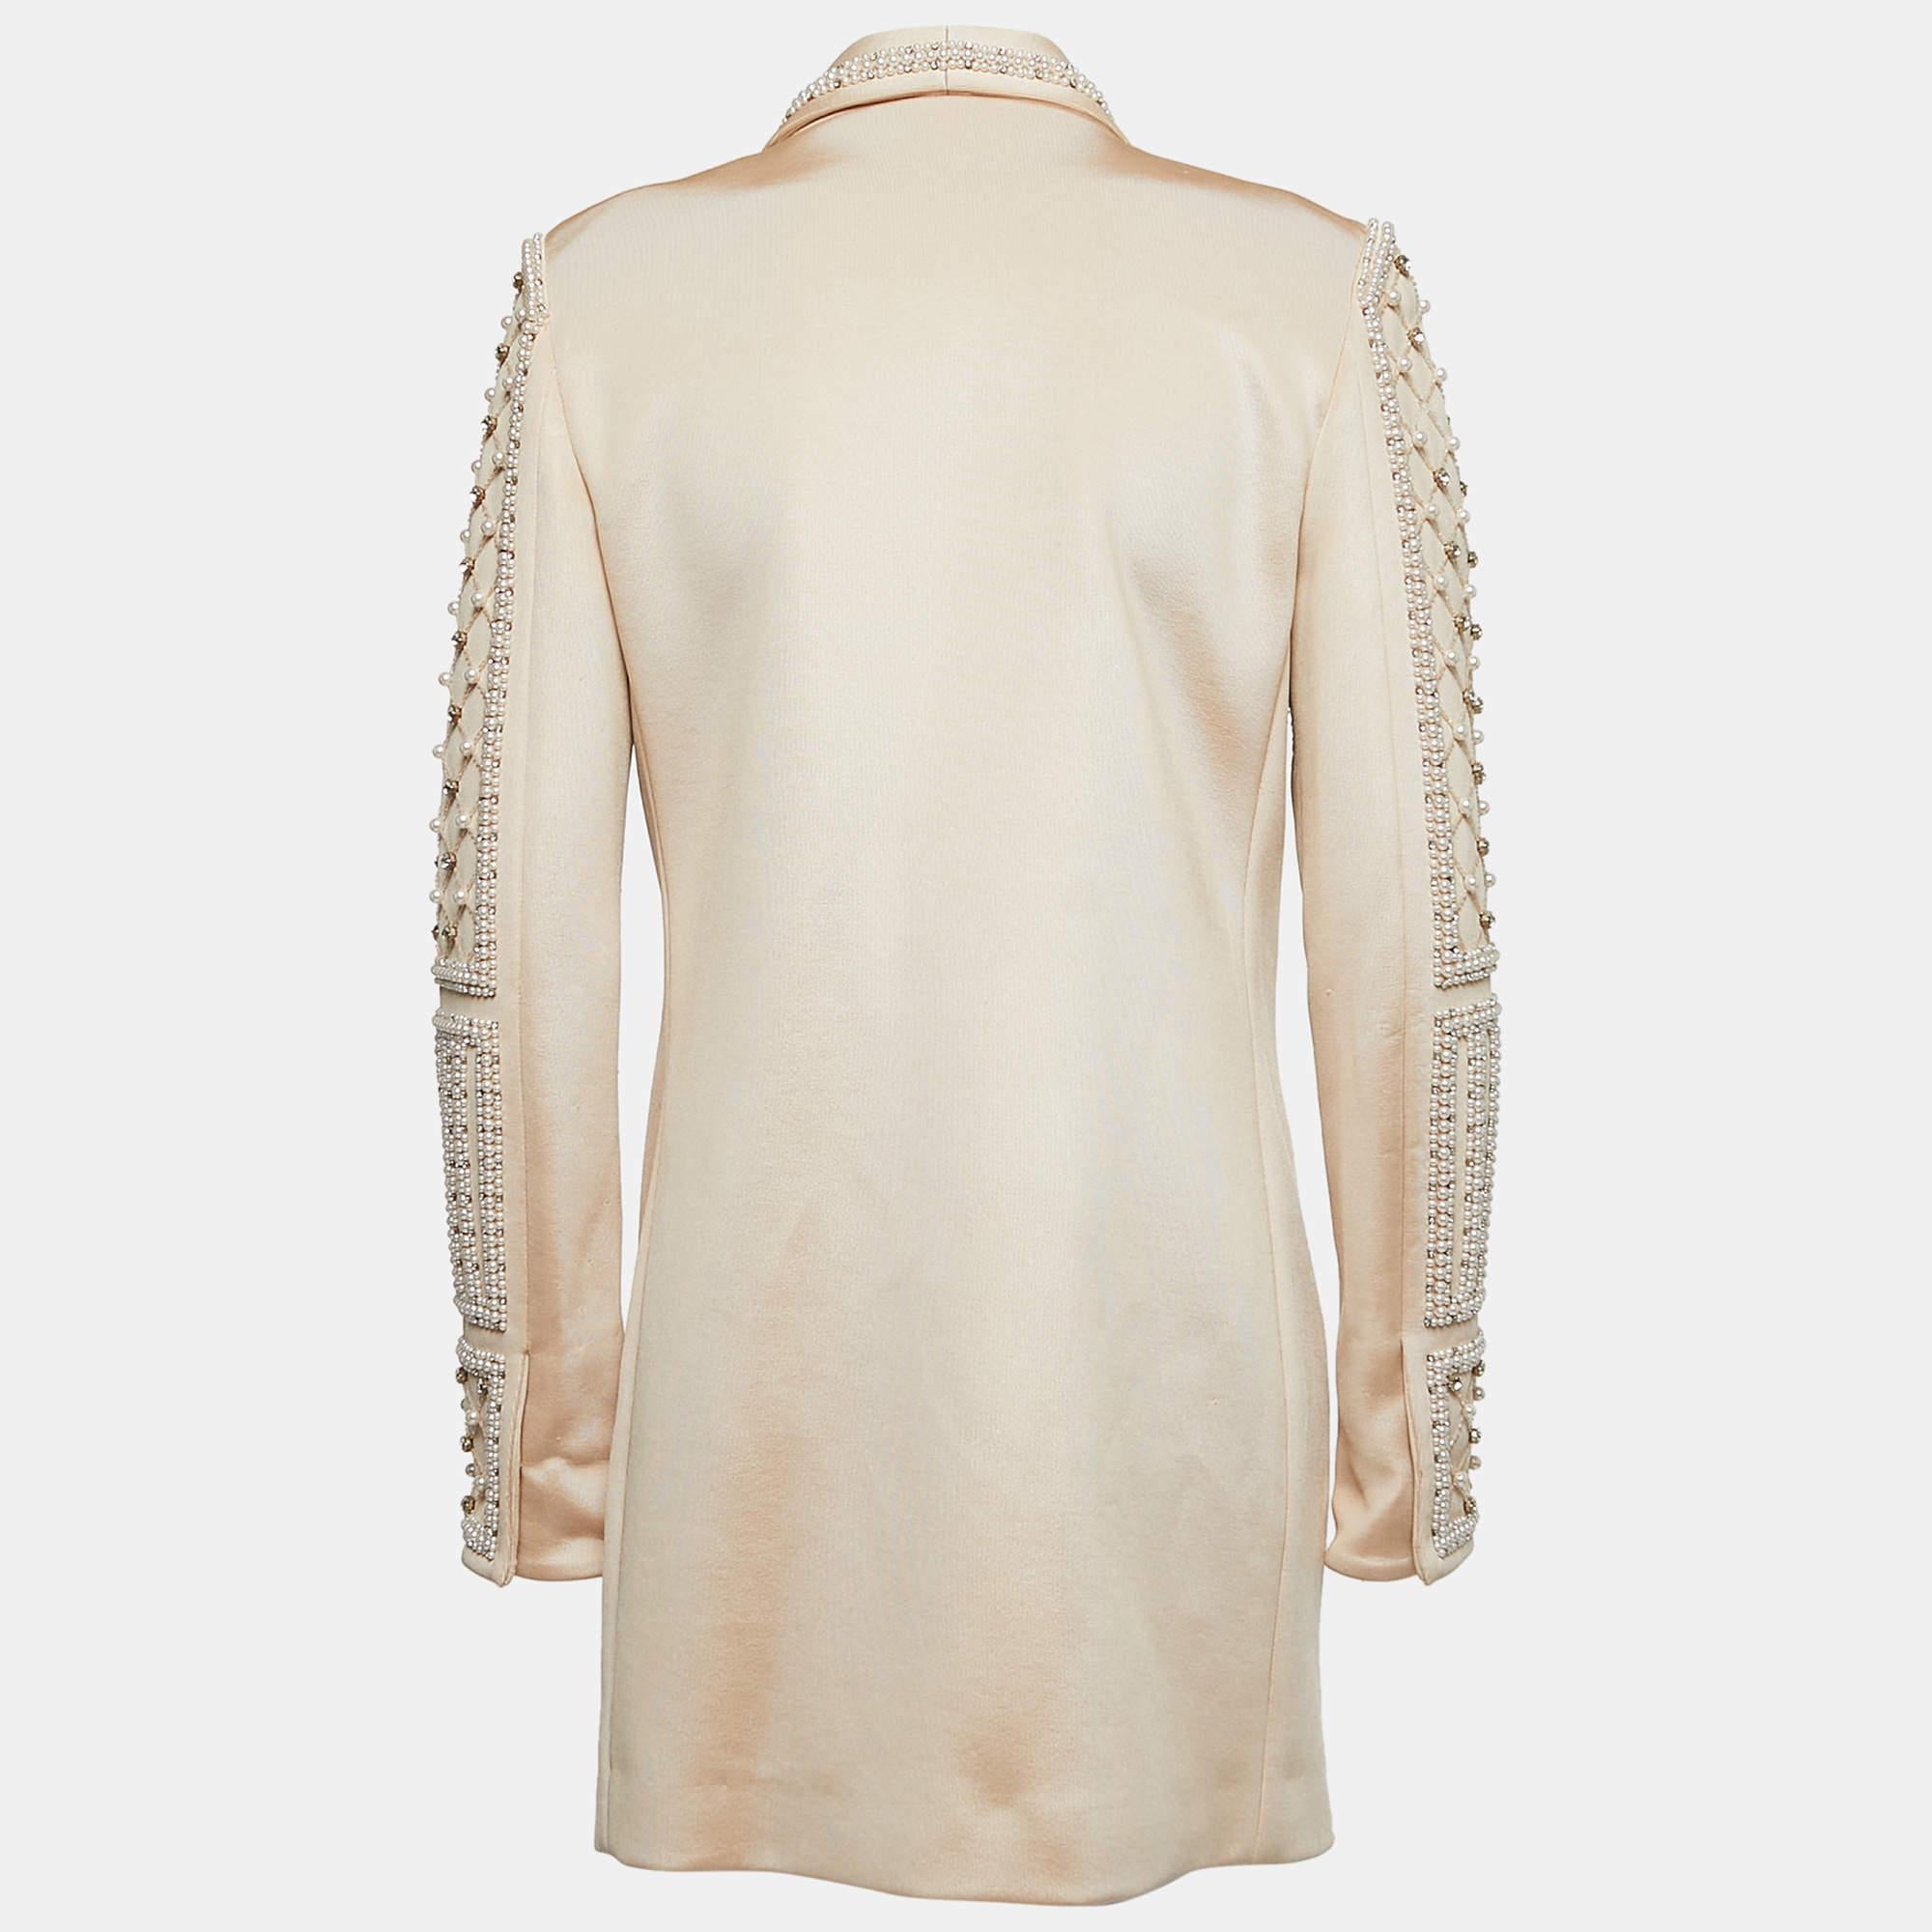 The Balmain blazer is a luxurious fashion piece. It features a sophisticated beige hue with exquisite crystal and pearl embellishments, creating a stunning visual appeal. The shawl lapel adds elegance, making it a perfect choice for evening